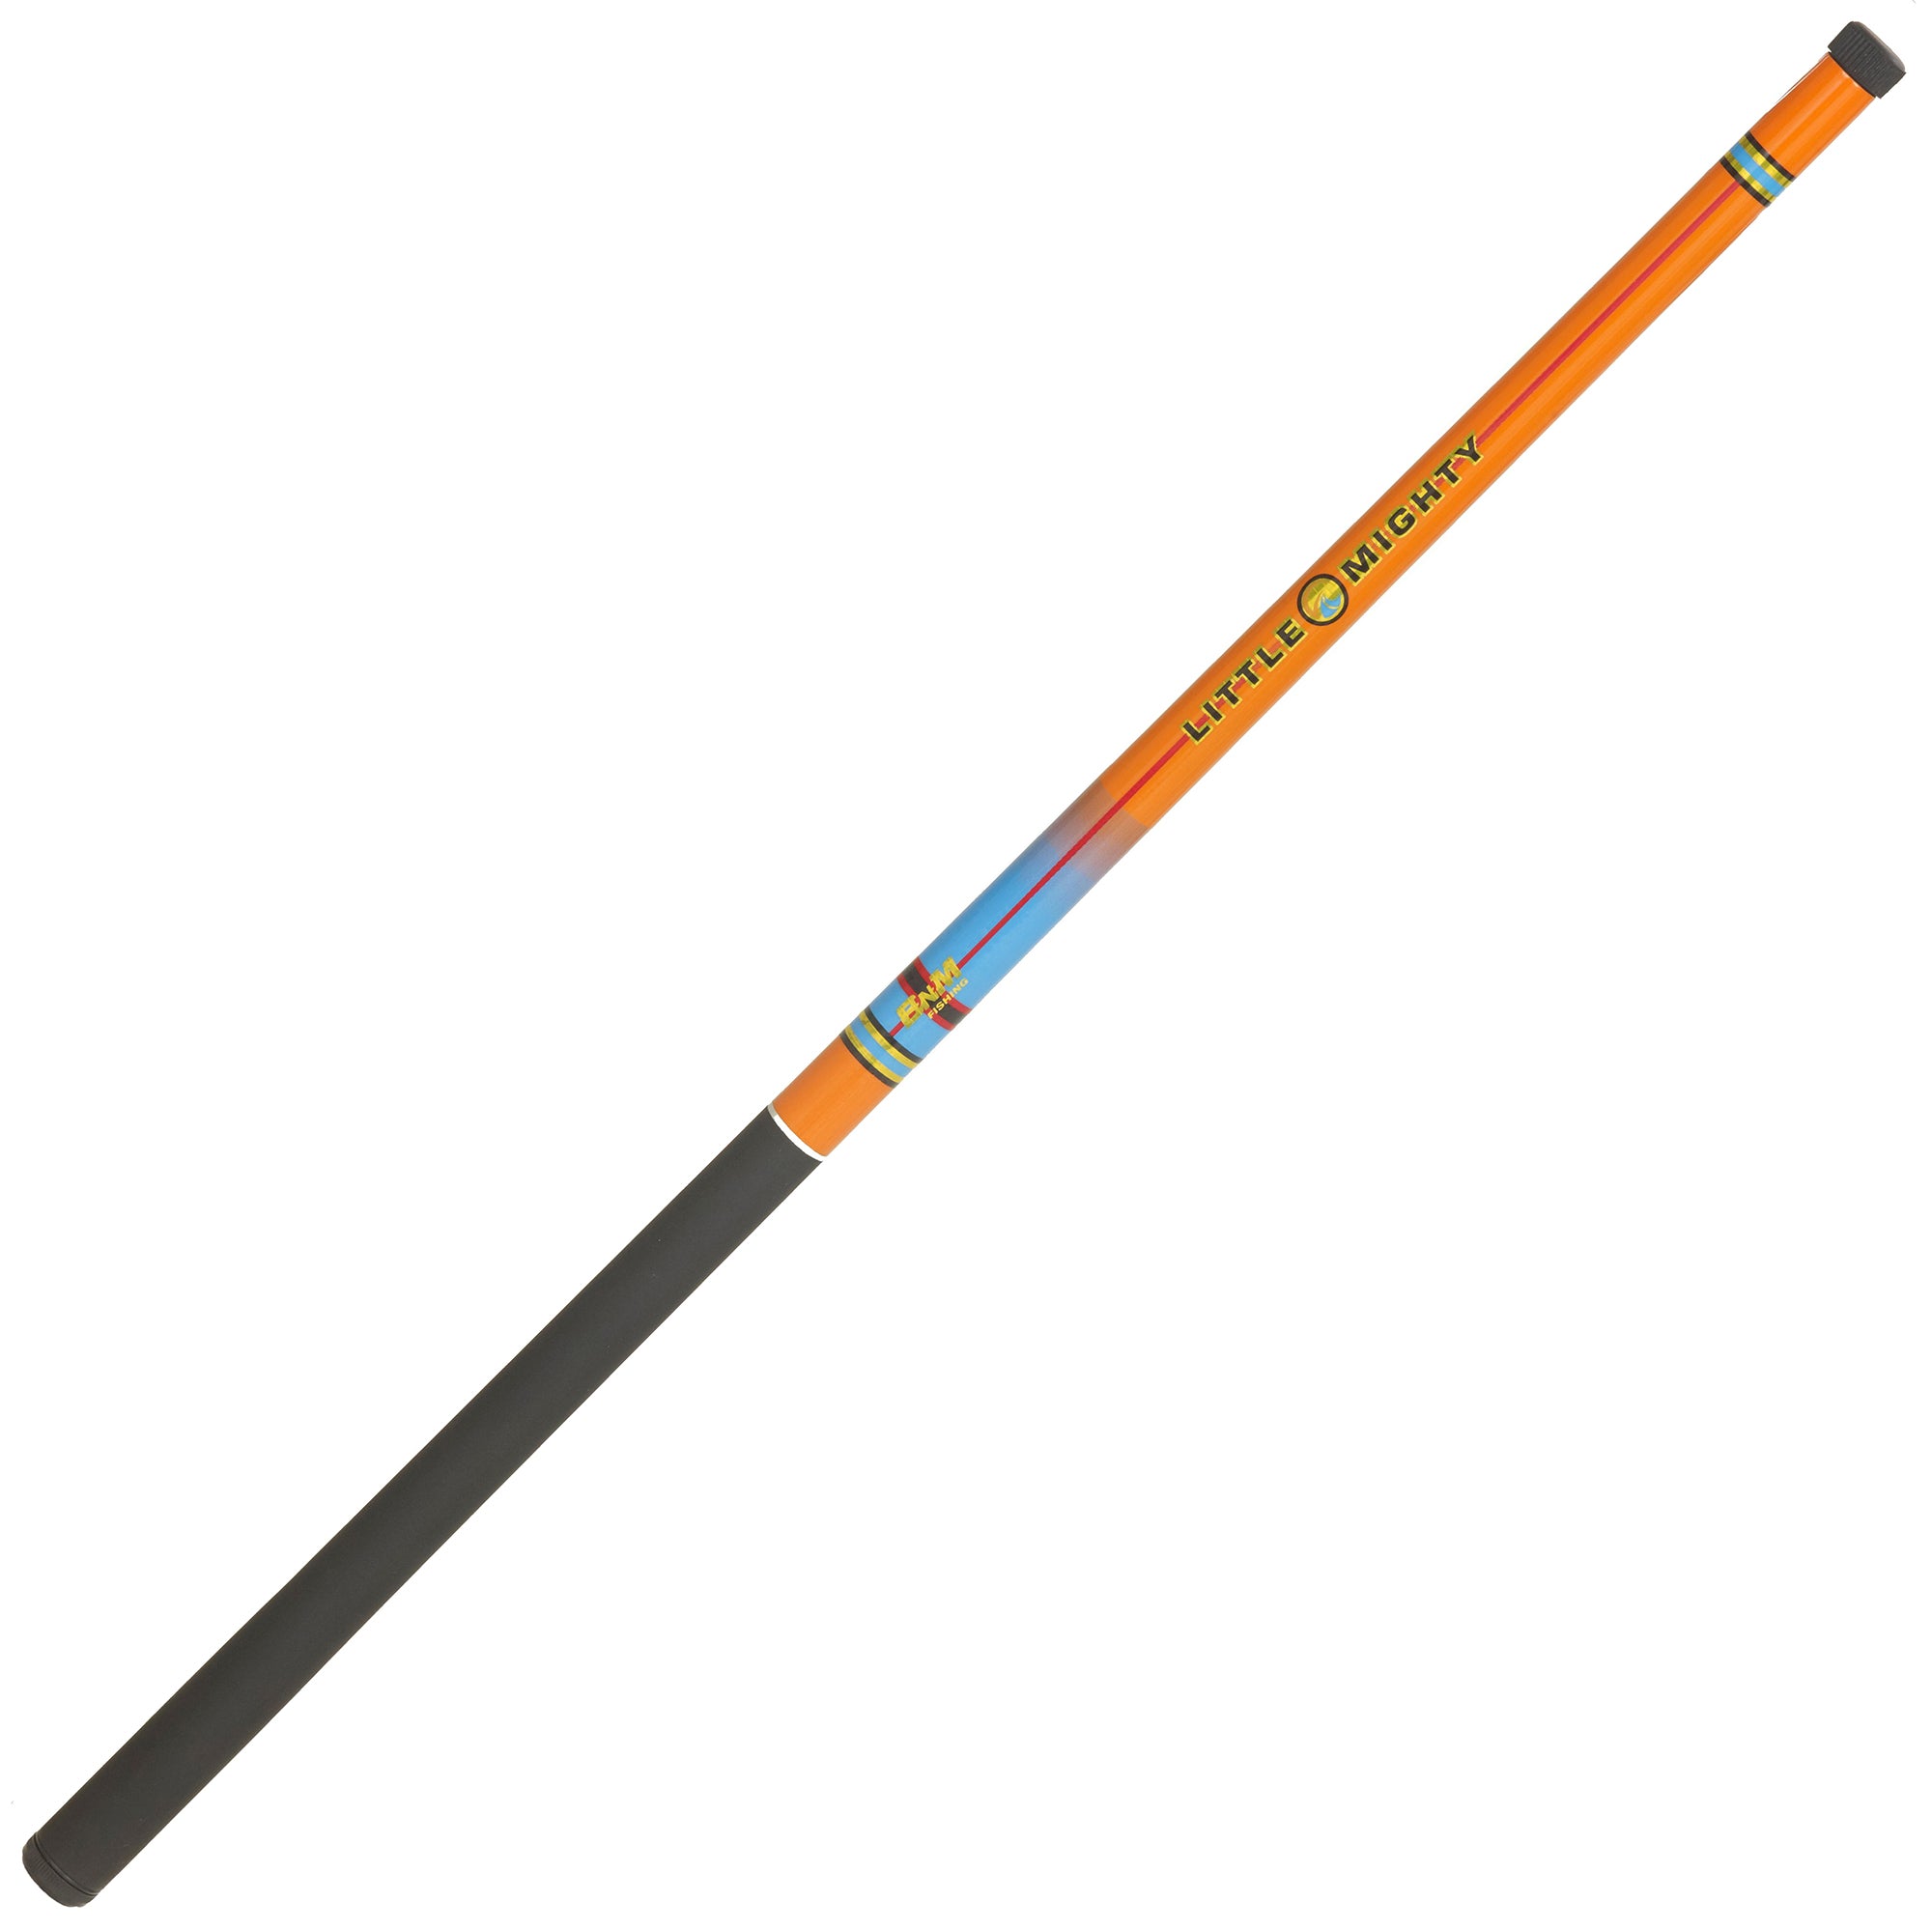 3ea BNM Pro Staff Trolling Rods Crappie Pole 20' PST204N B&m 4 Section Rod  for sale online